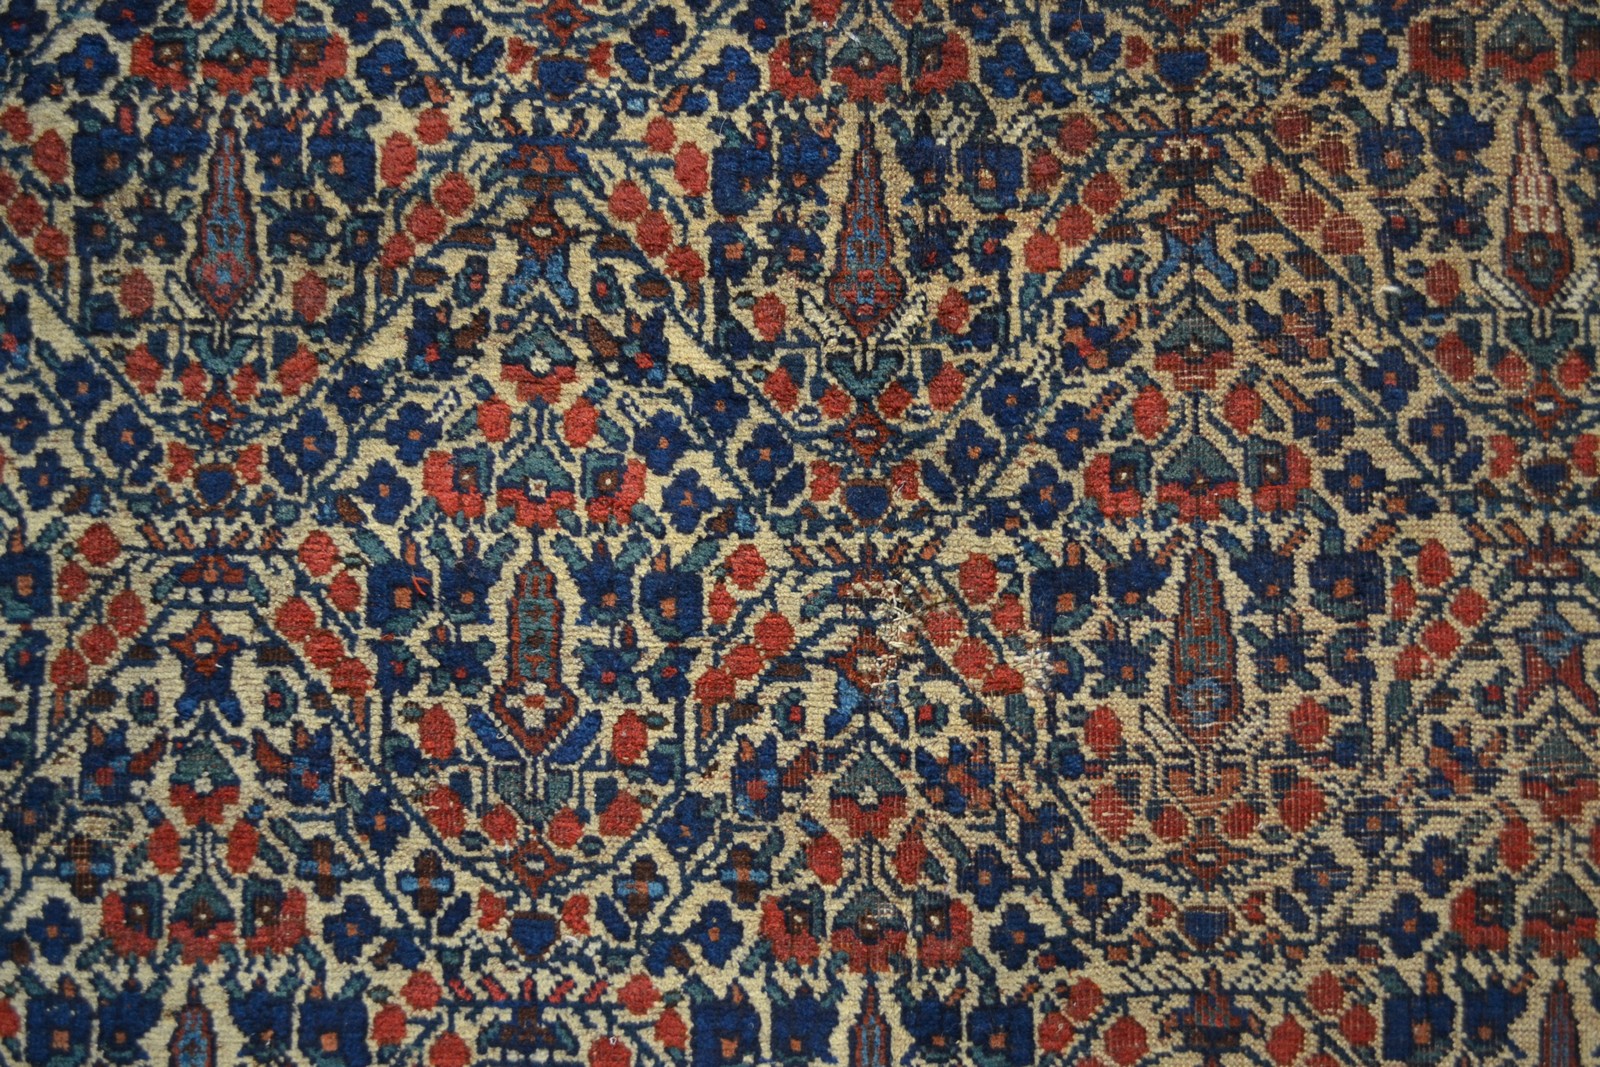 Neiriz rug, Fars, south west Persia, about 1930s, 5ft. 9in. x 4ft. 10in. 1.75m. x 1.47m. Overall - Image 3 of 5